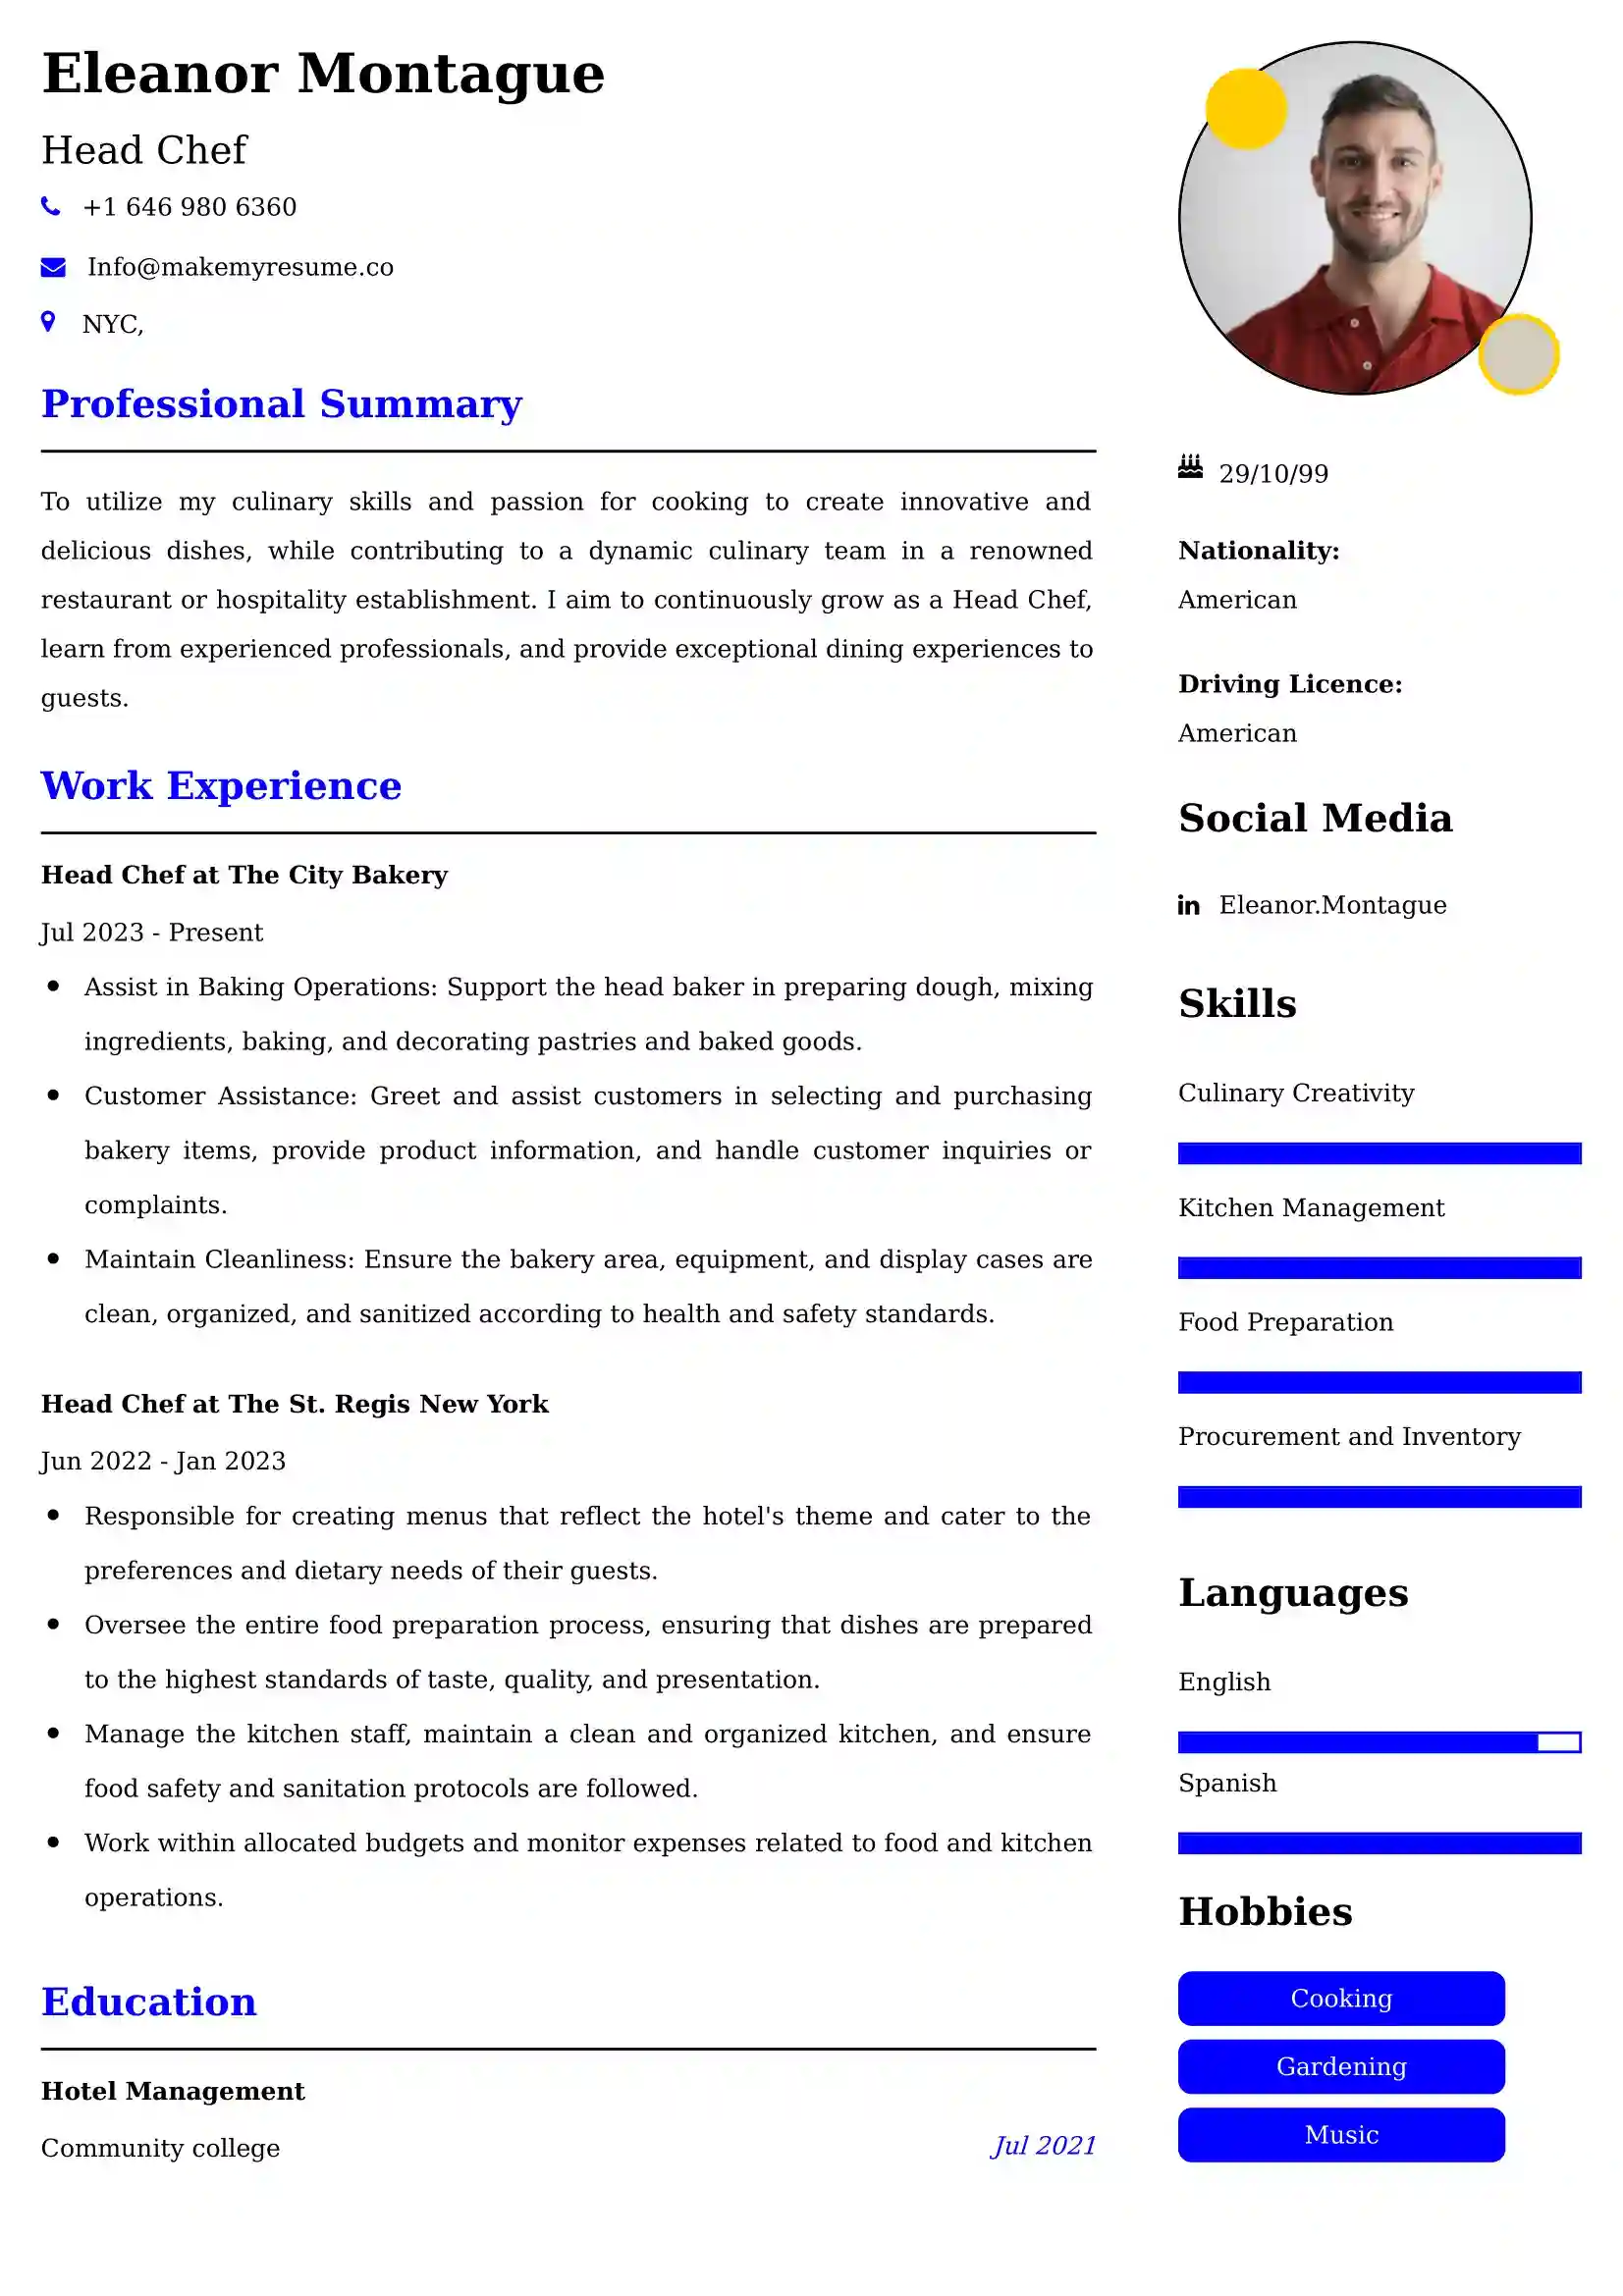 Head Chef Resume Examples - Australian Format and Tips